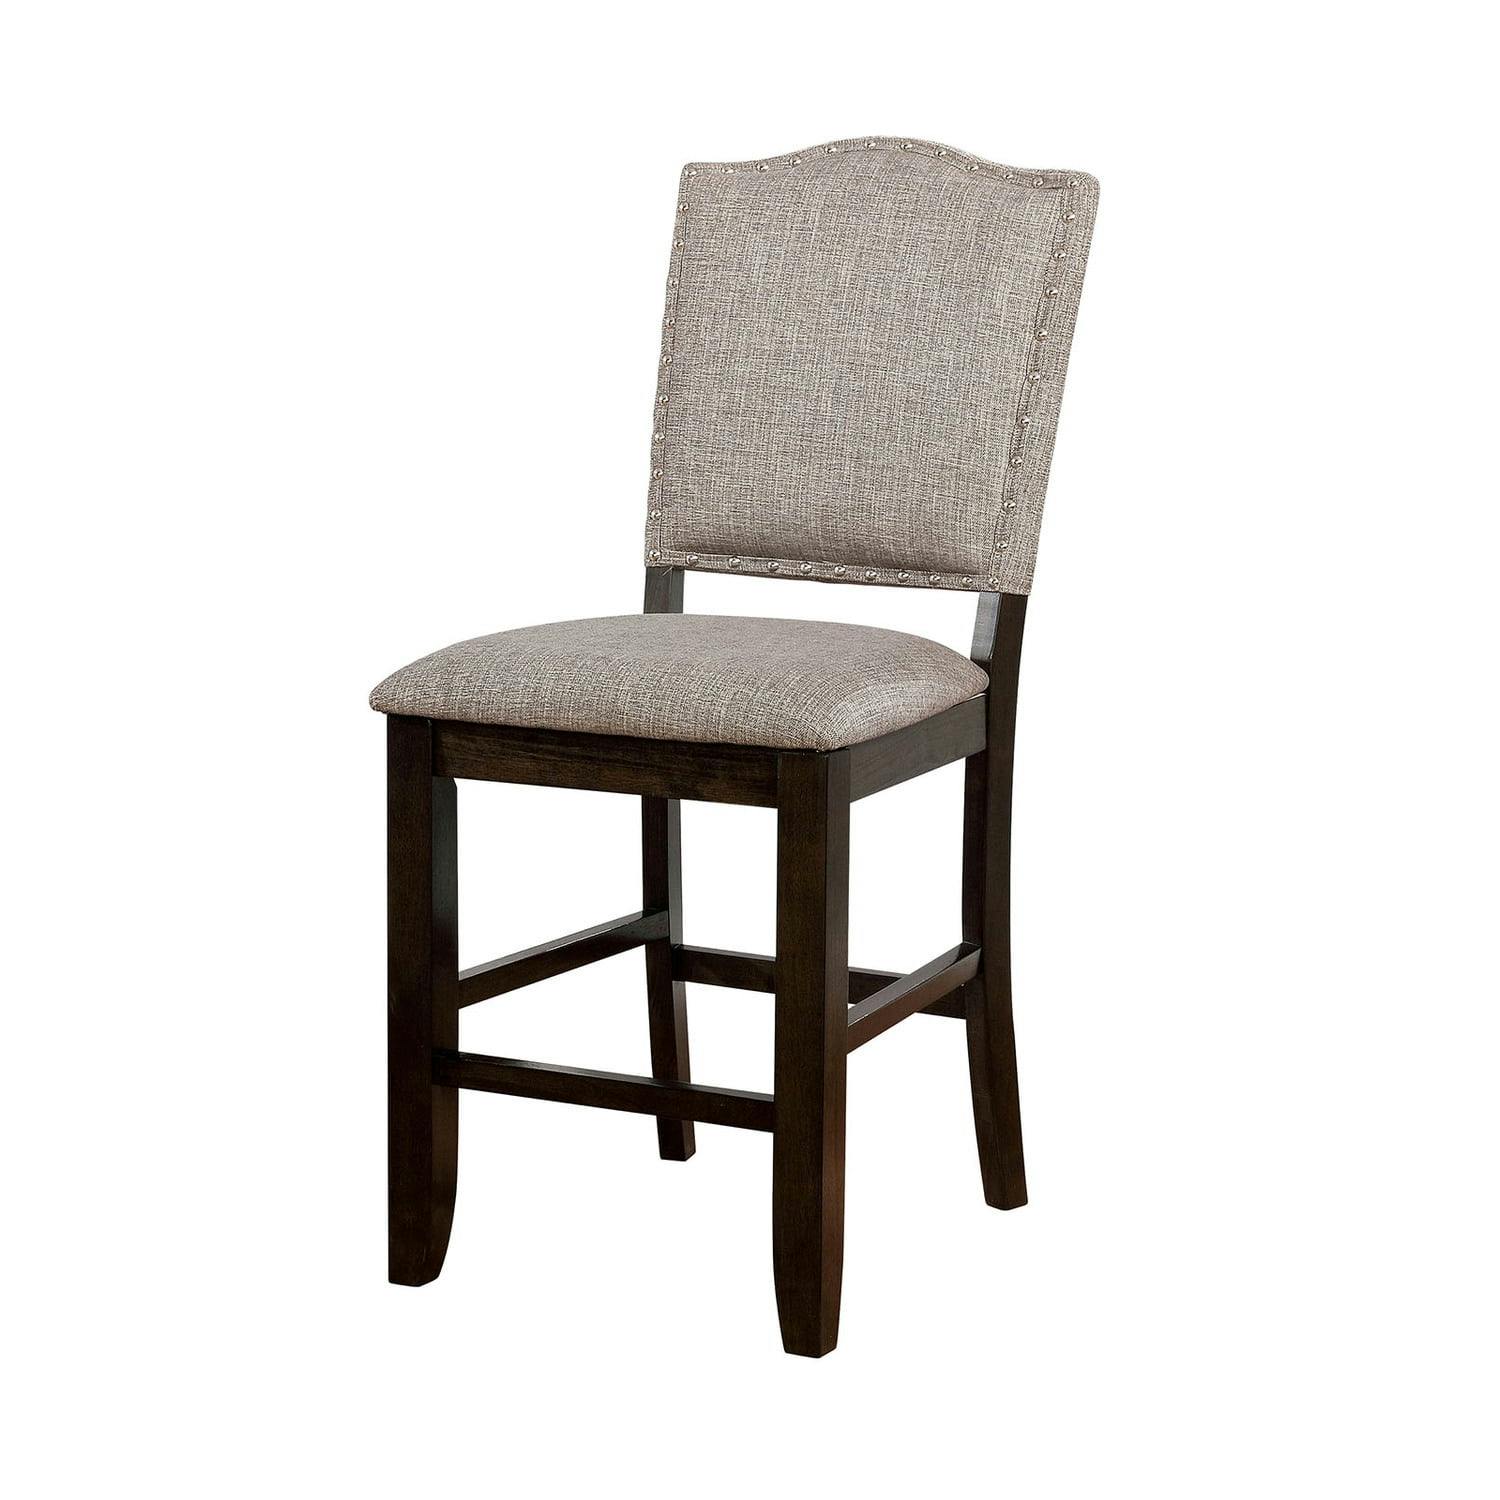 Modern Gray Fabric Upholstered Wooden Counter Height Chair with Nailhead Trim